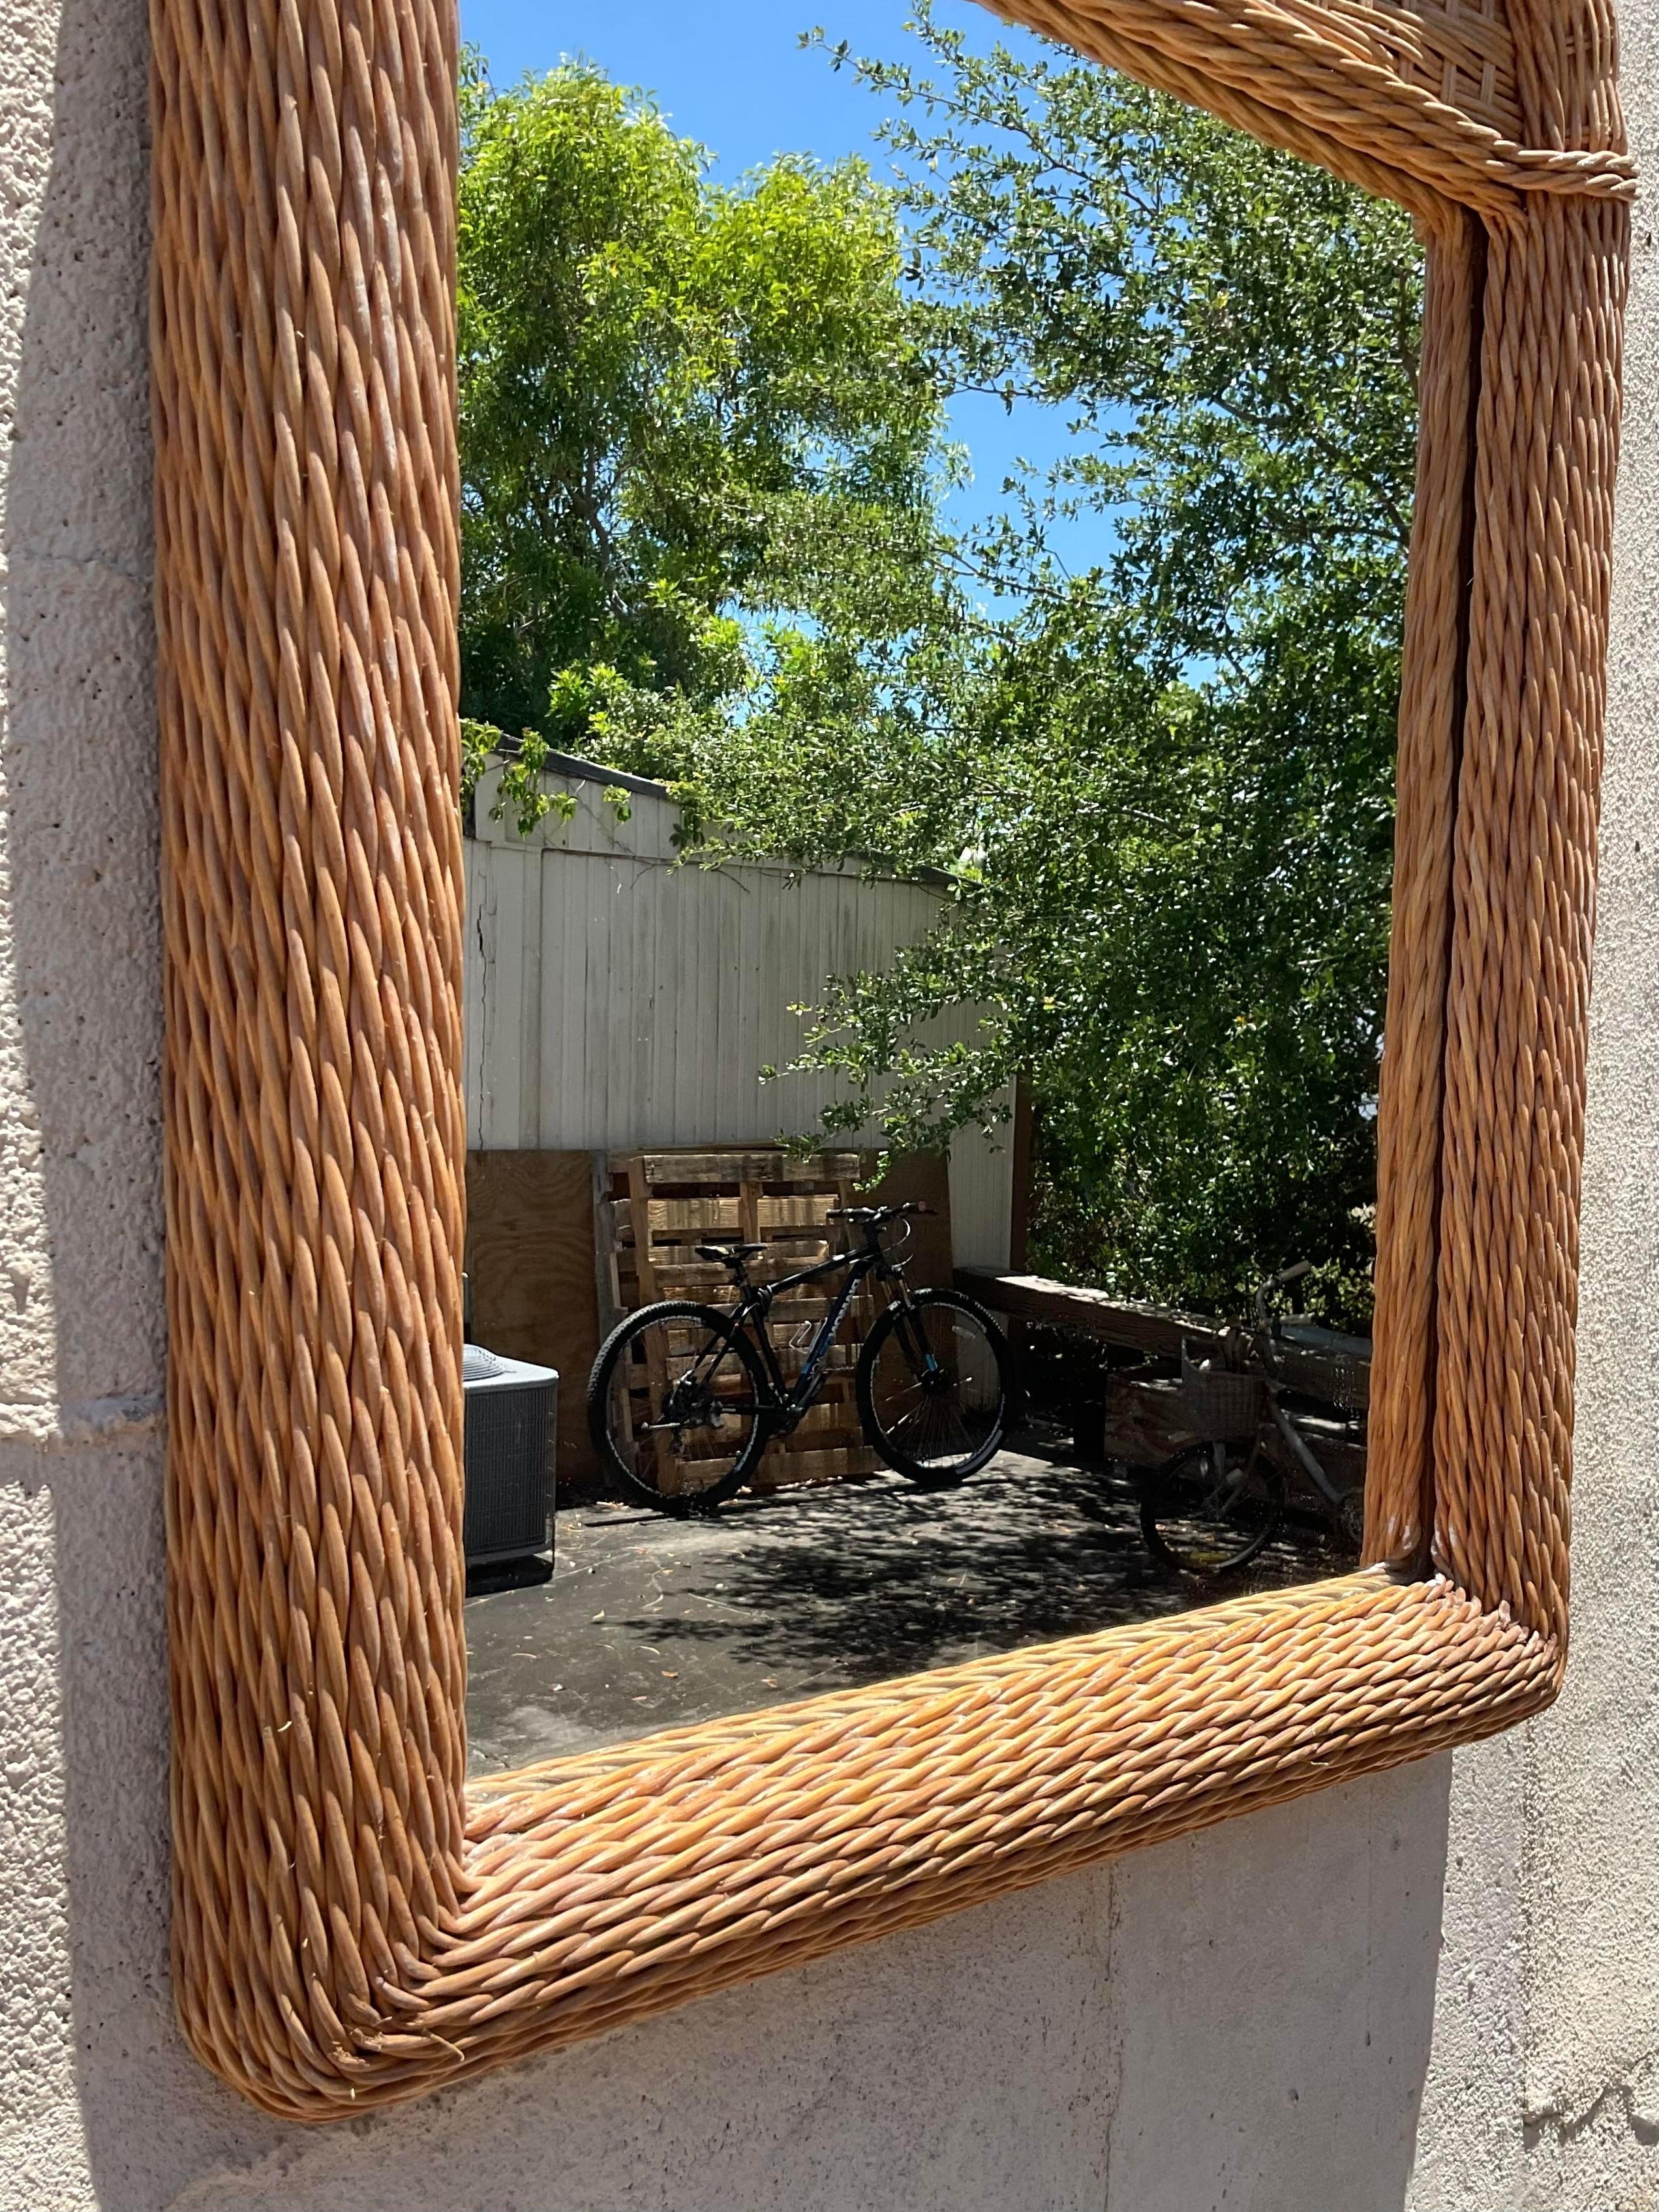 Invite the relaxed charm of coastal living into your home with this vintage woven rattan arched mirror. Handcrafted with American flair, its natural texture and arched design evoke seaside tranquility, adding a touch of coastal elegance to any space.